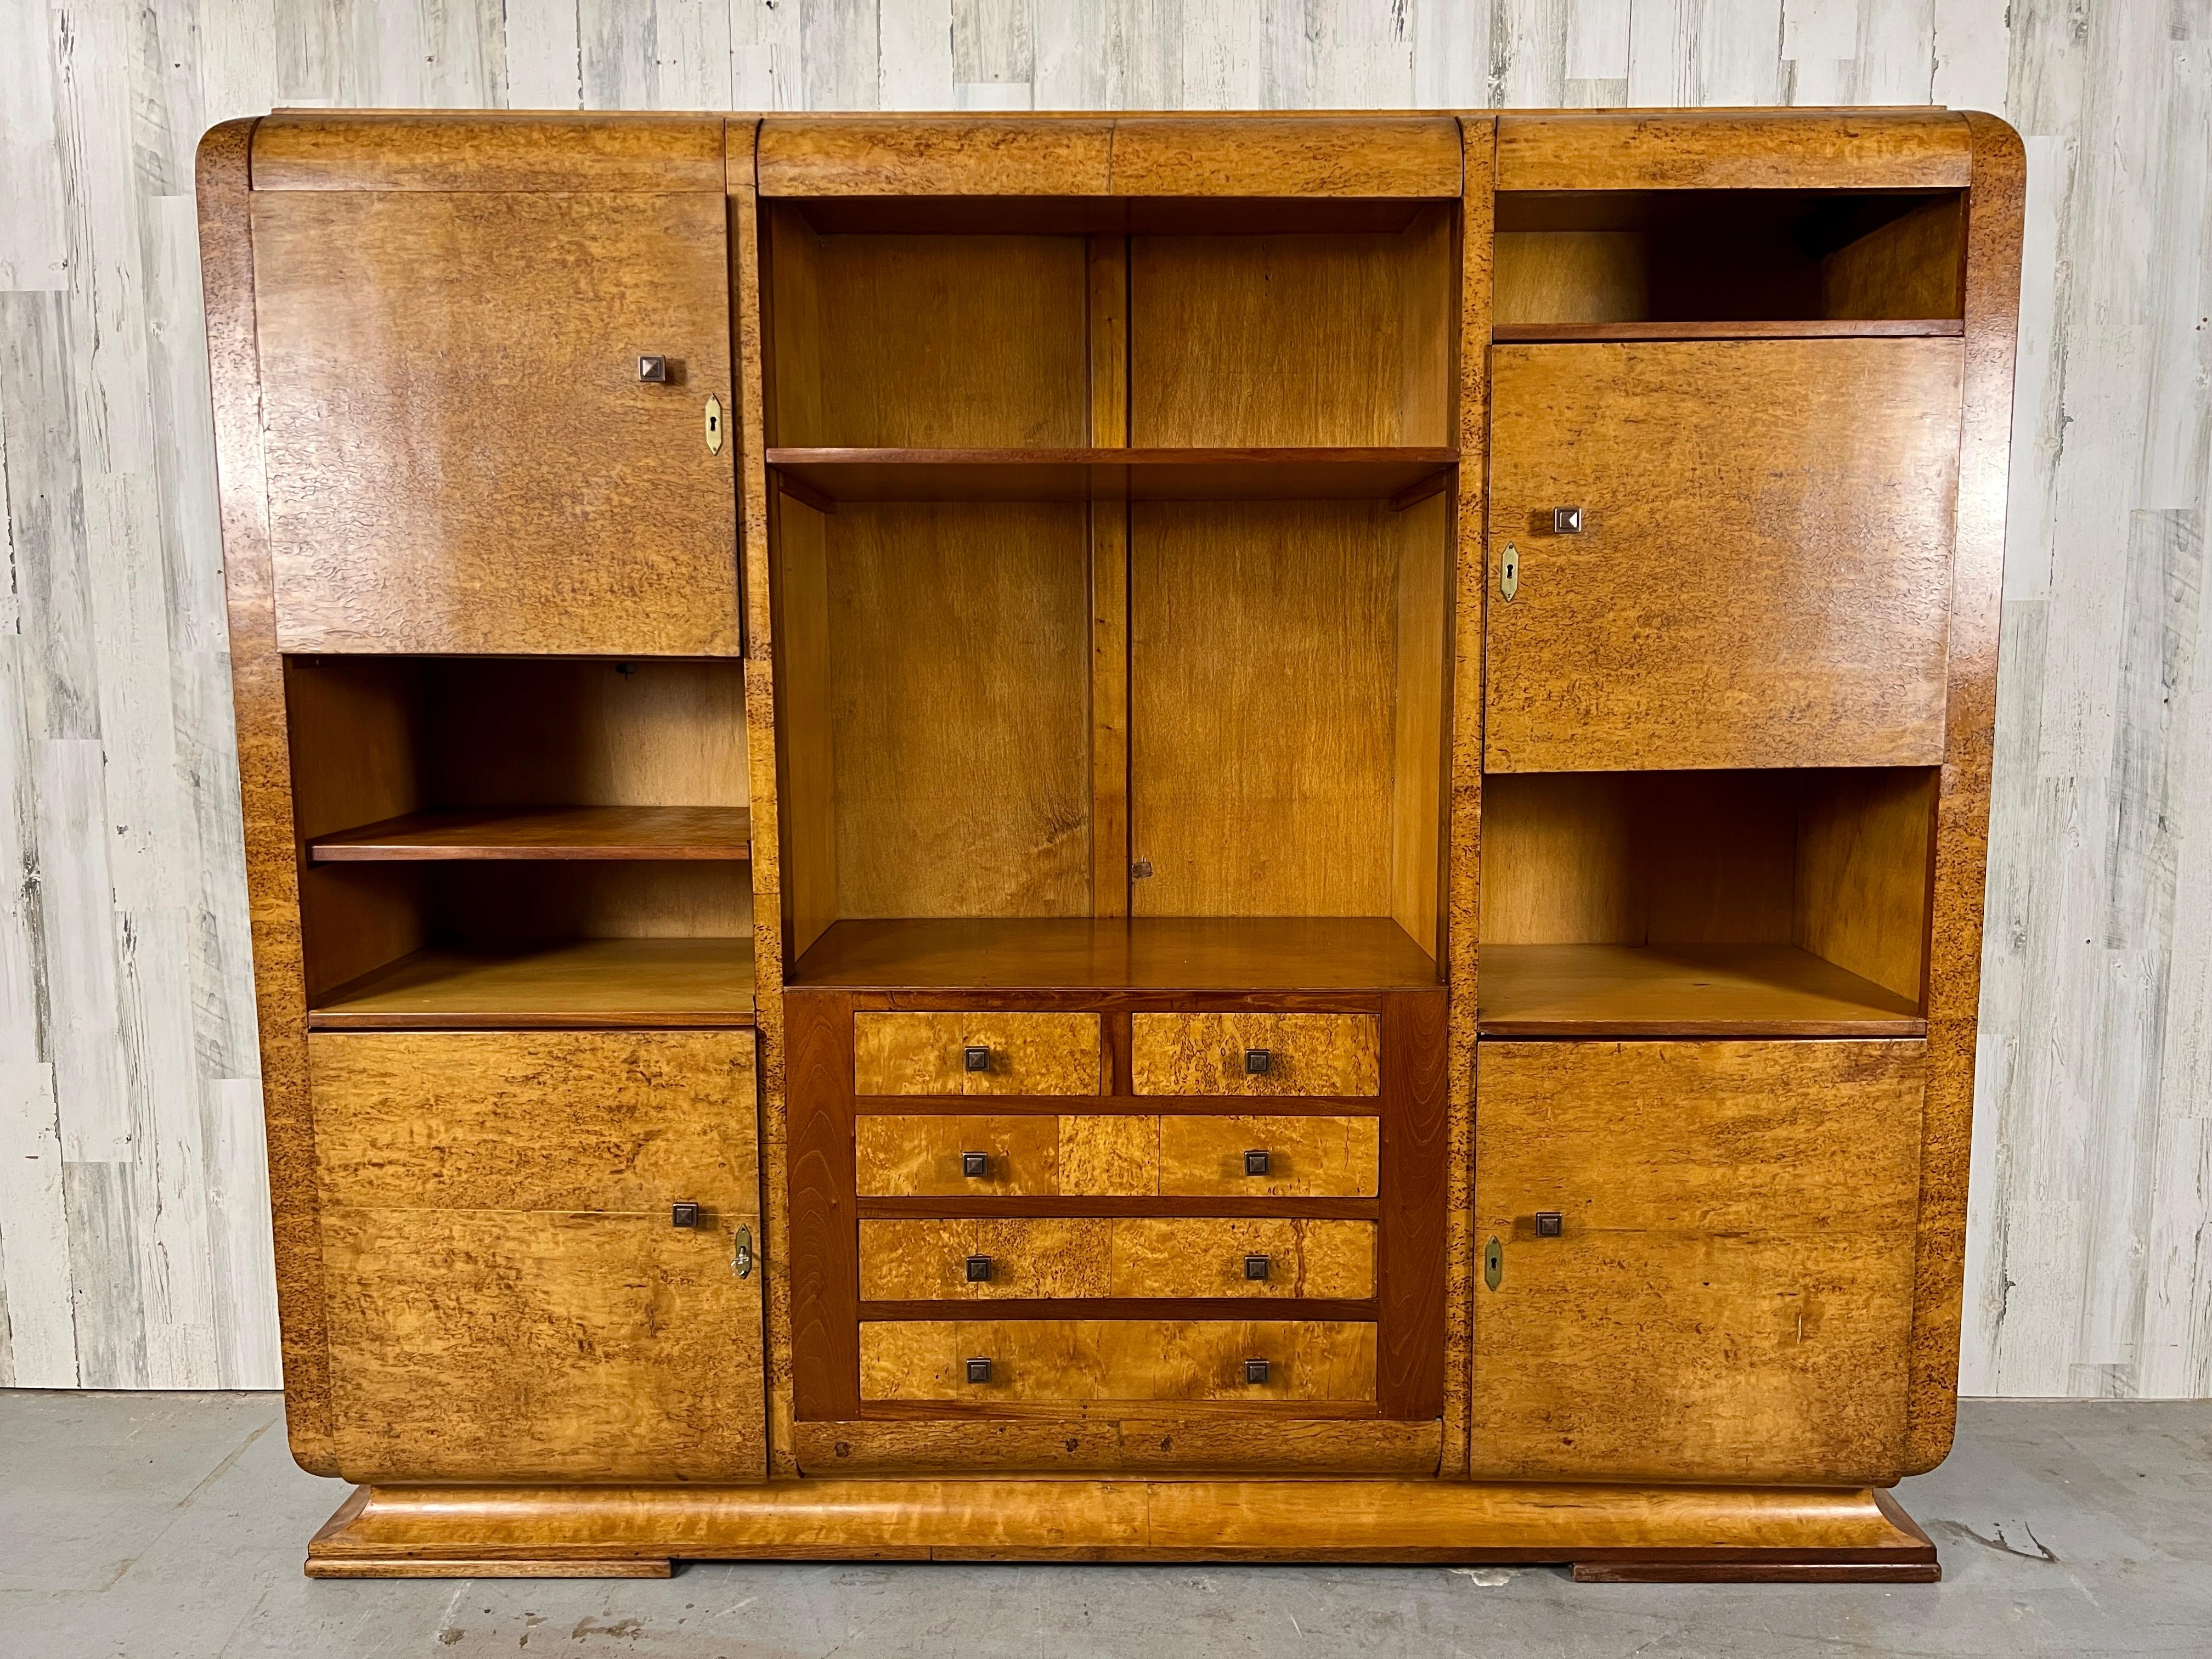 Birdseye maple waterfall cabinet /bookcase with multiple enclosed cabinets and open shelves. This cabinet does disassemble for easy transport.
The bottom doors have working locks, the upper doors the locks do not work but the have been fitted with